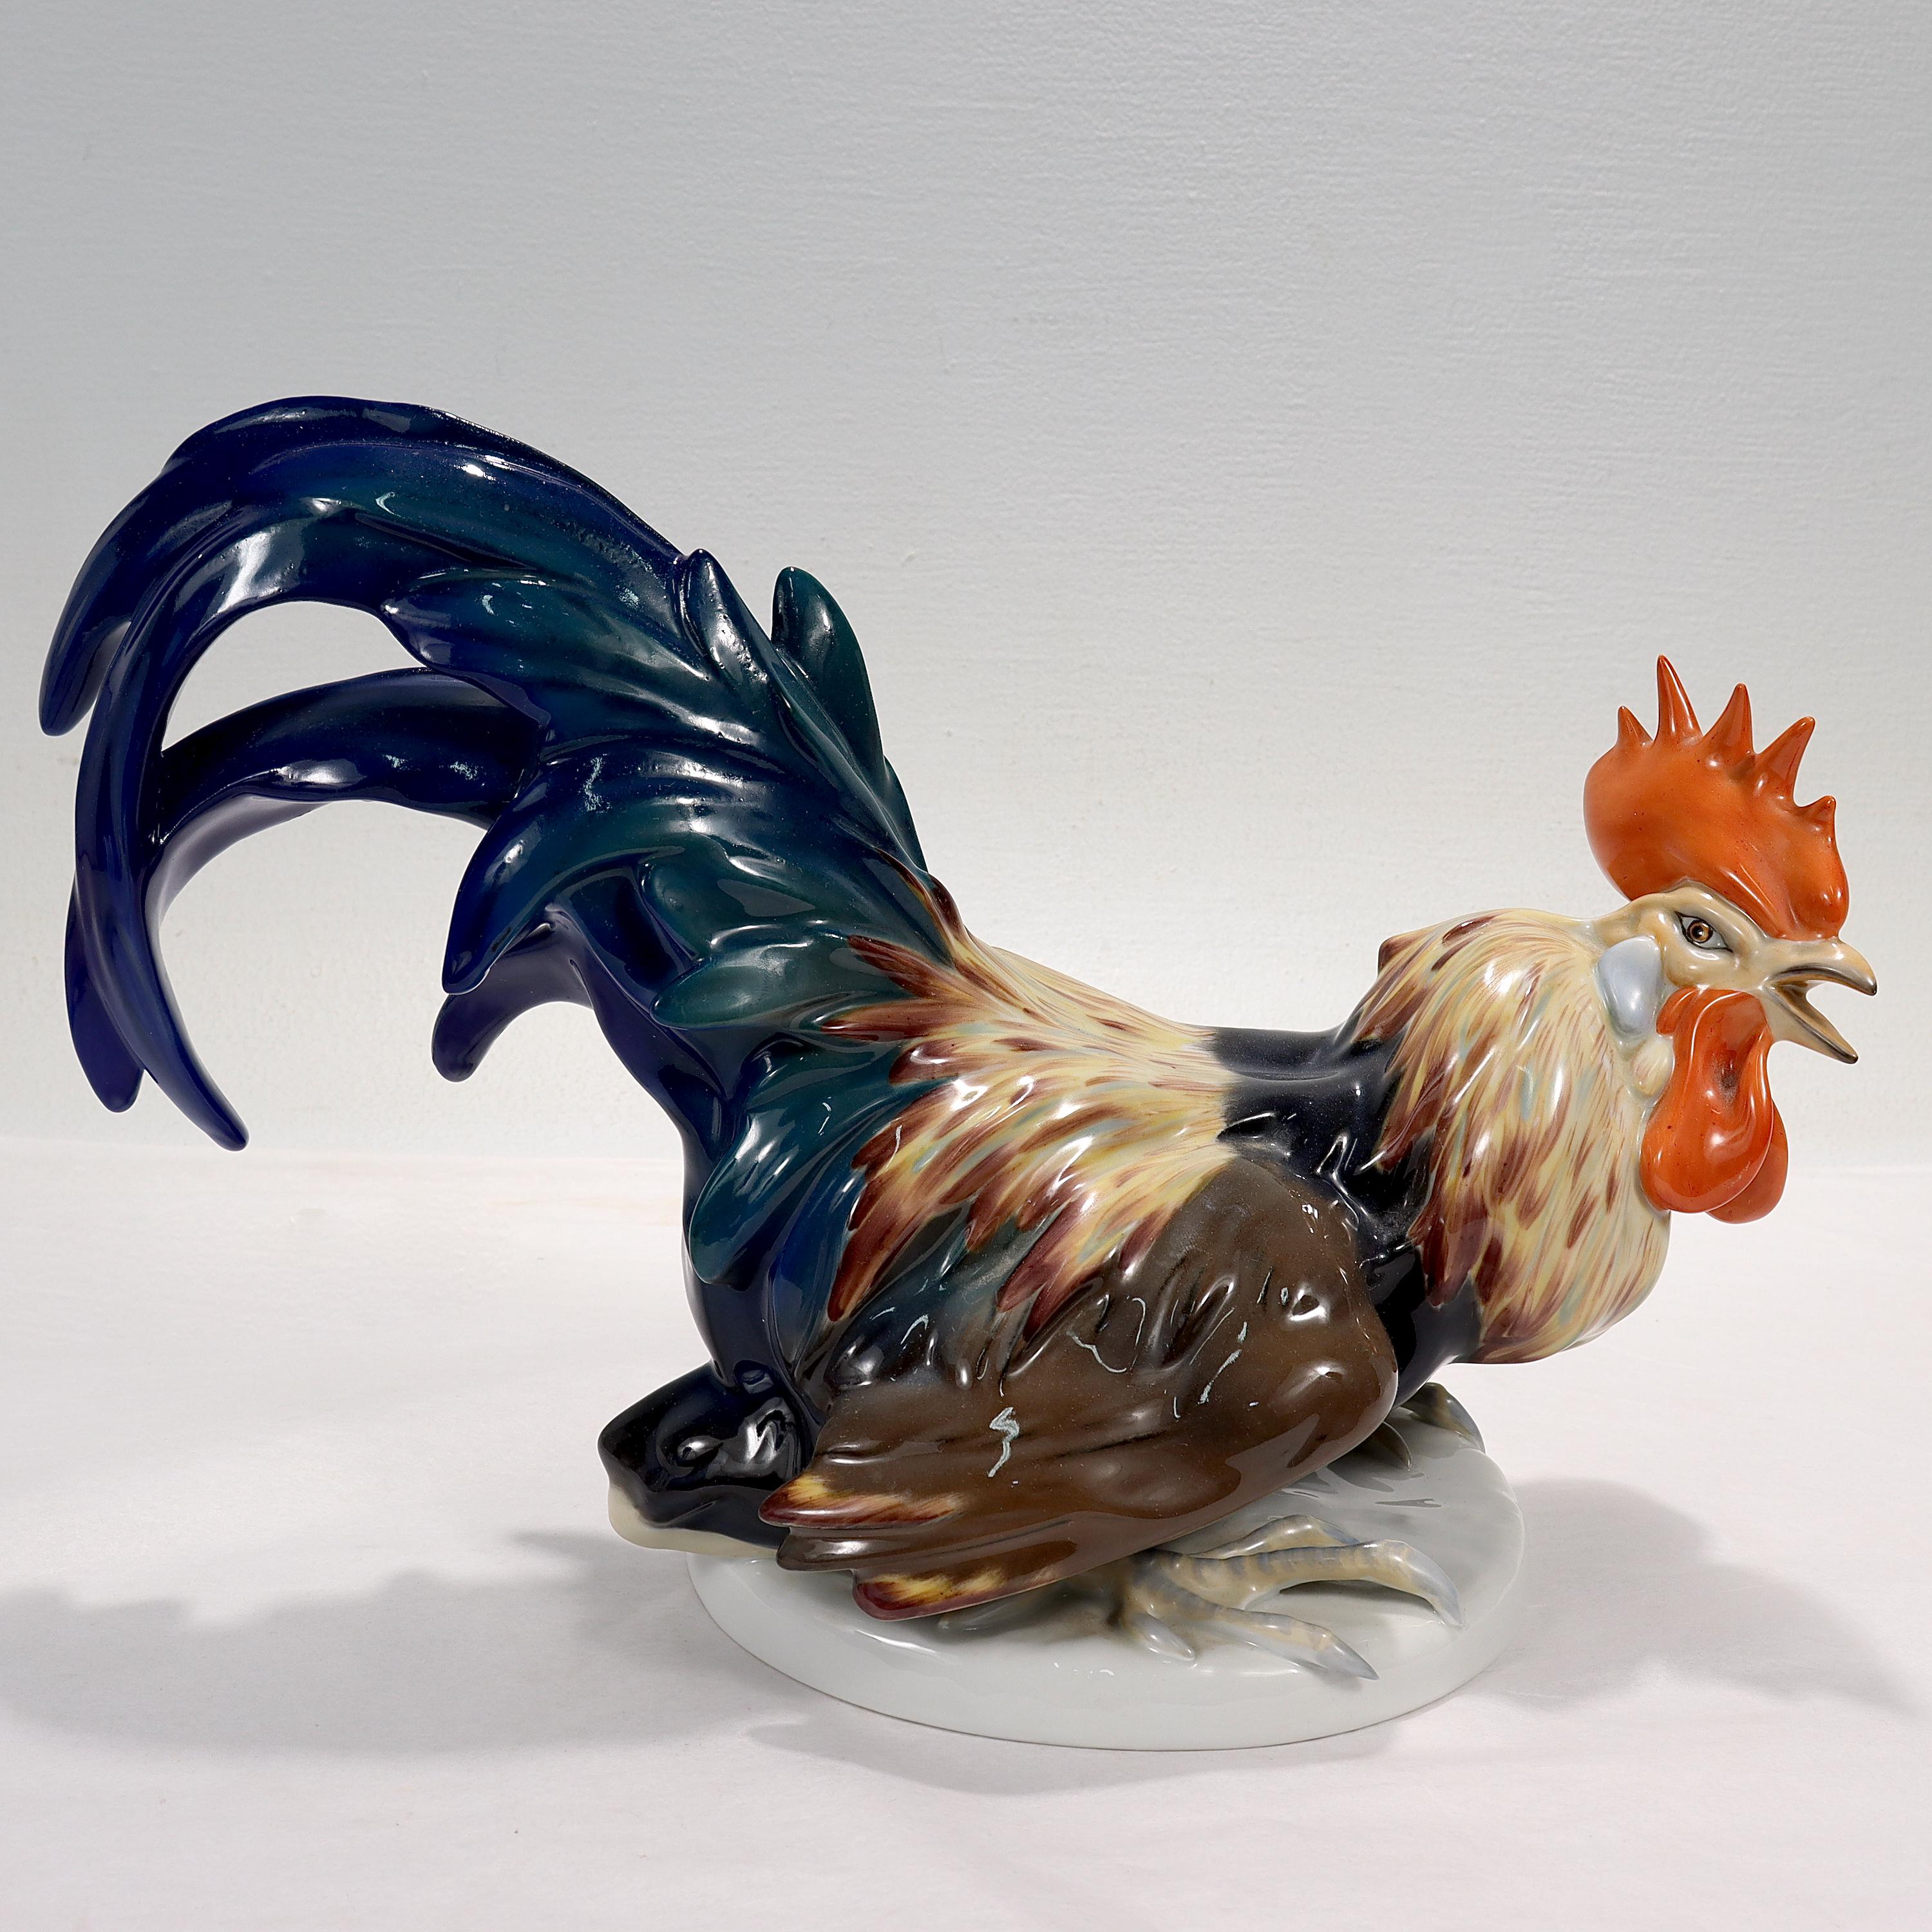 A fine mid-century Rosenthal porcelain figurine.

In the form of a rooster.

Designed by J. Feldtmann in the 1950s for Rosenthal.

Simply a wonderful rooster figurine! 

Date:
1950s

Overall Condition:
It is in overall good, as-pictured,